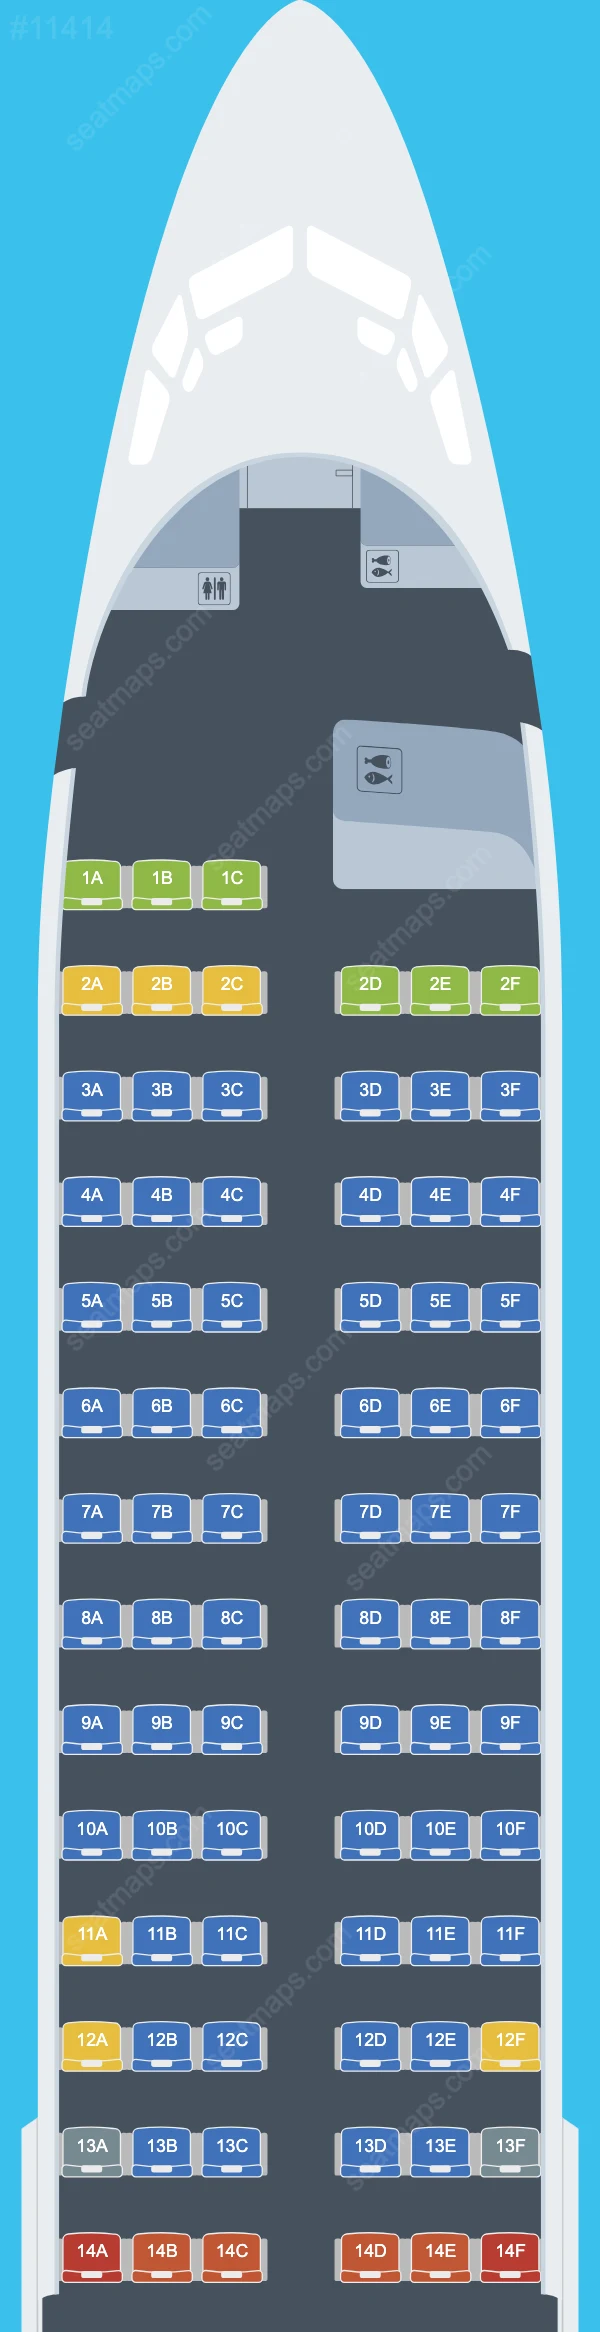 Red Sea Airlines Boeing 737 Seat Maps 737-800